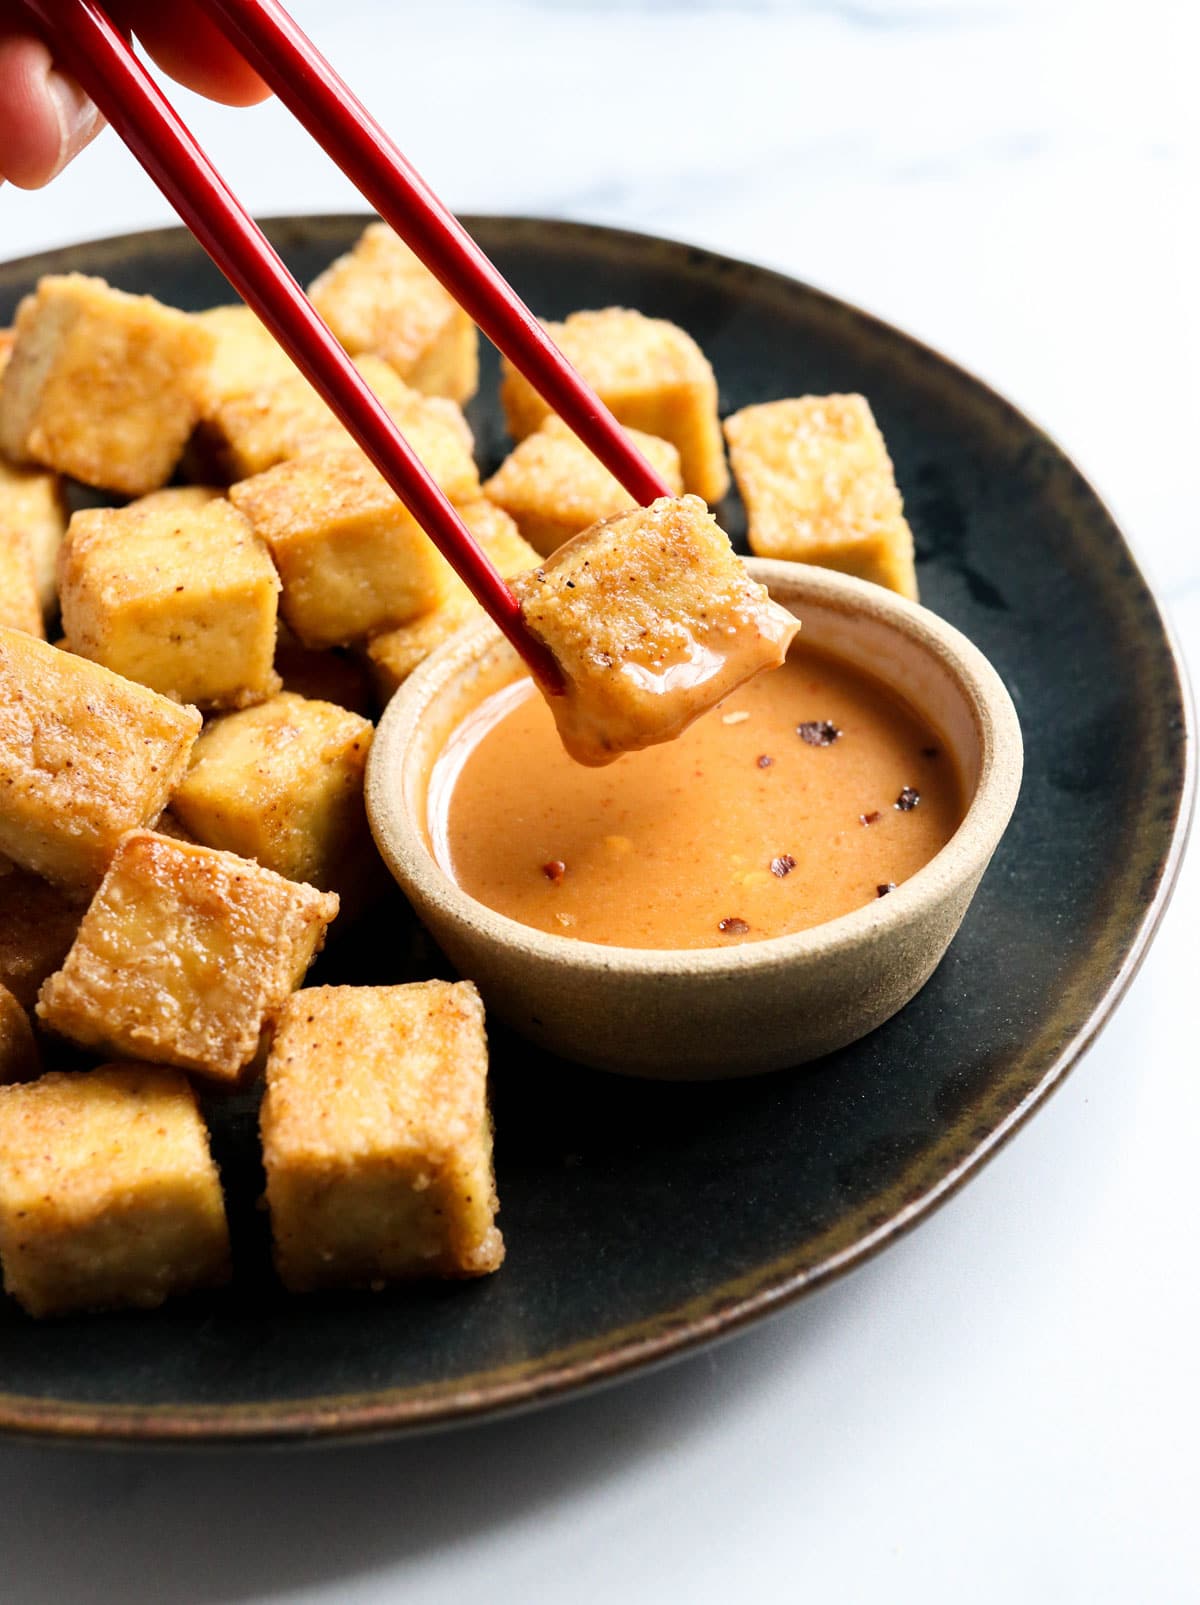 baked tofu dipped in sauce